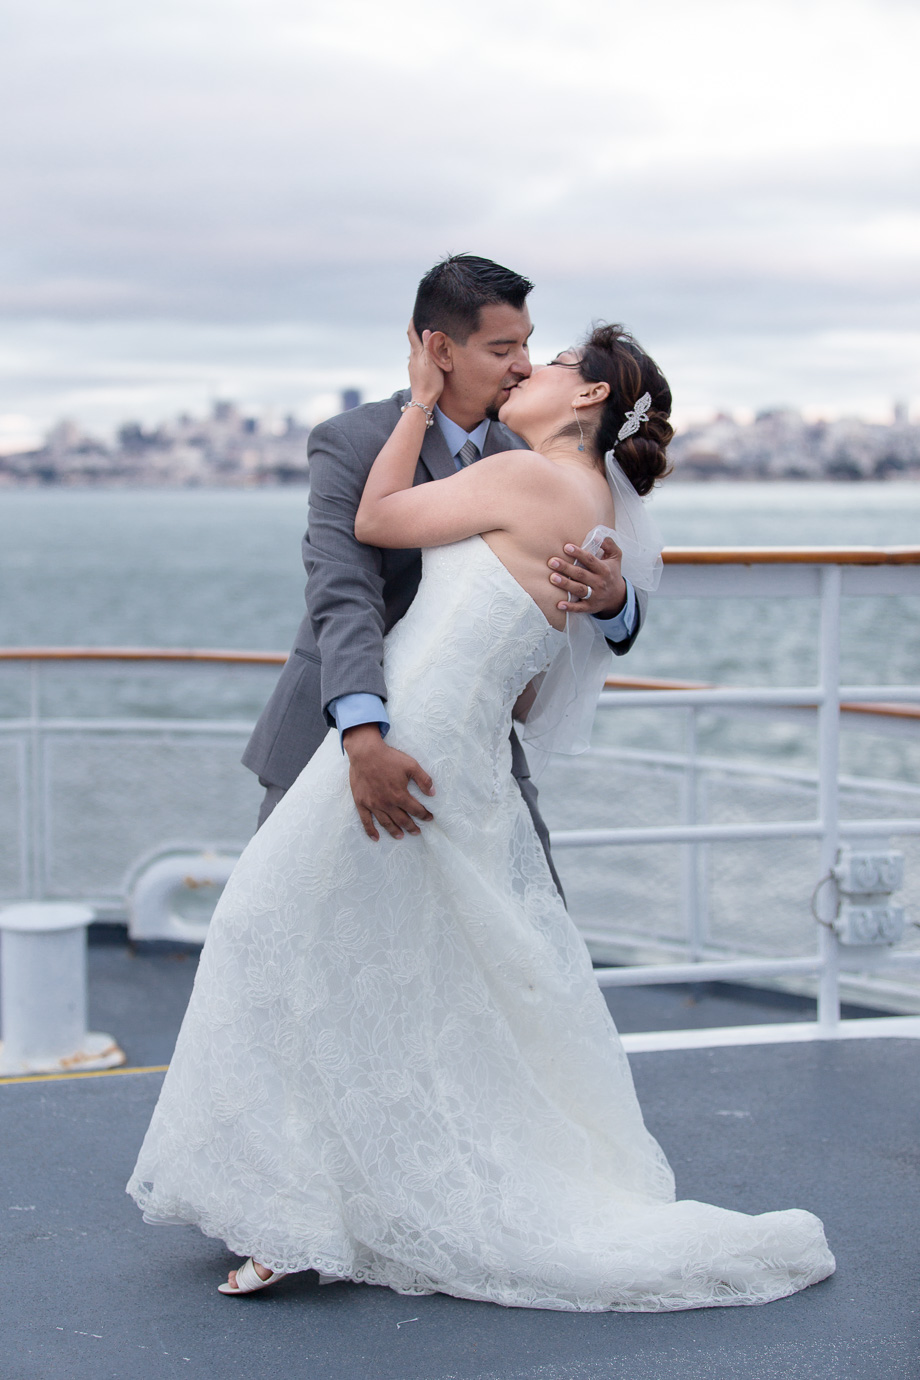 Bride and groom kissing on the deck of the California Hornblower cruise boat